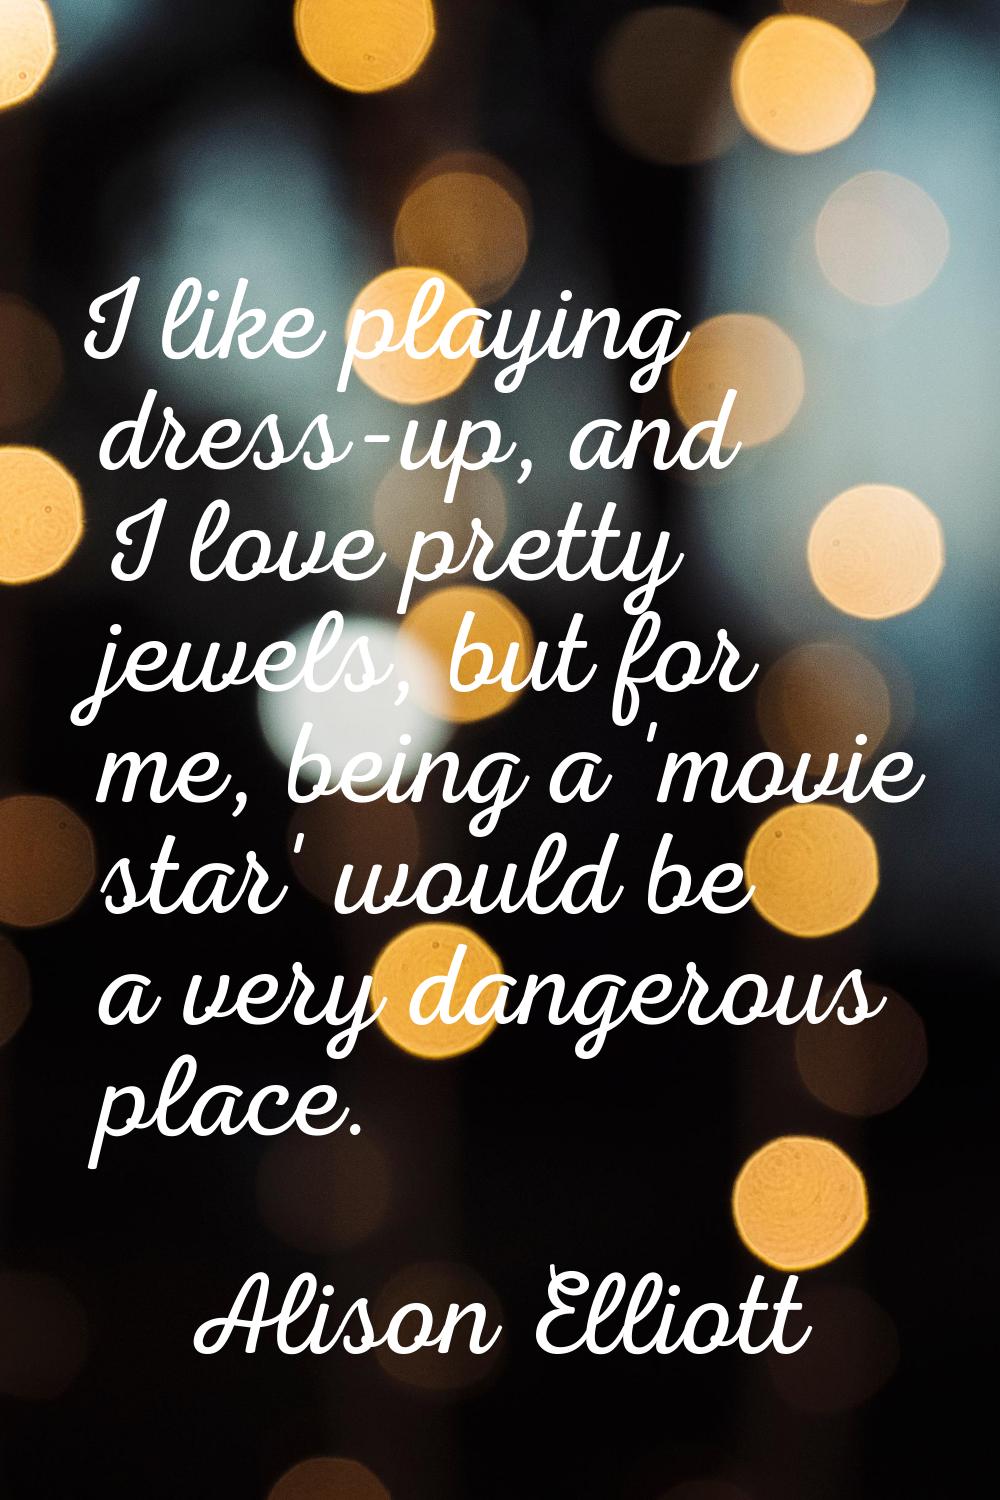 I like playing dress-up, and I love pretty jewels, but for me, being a 'movie star' would be a very